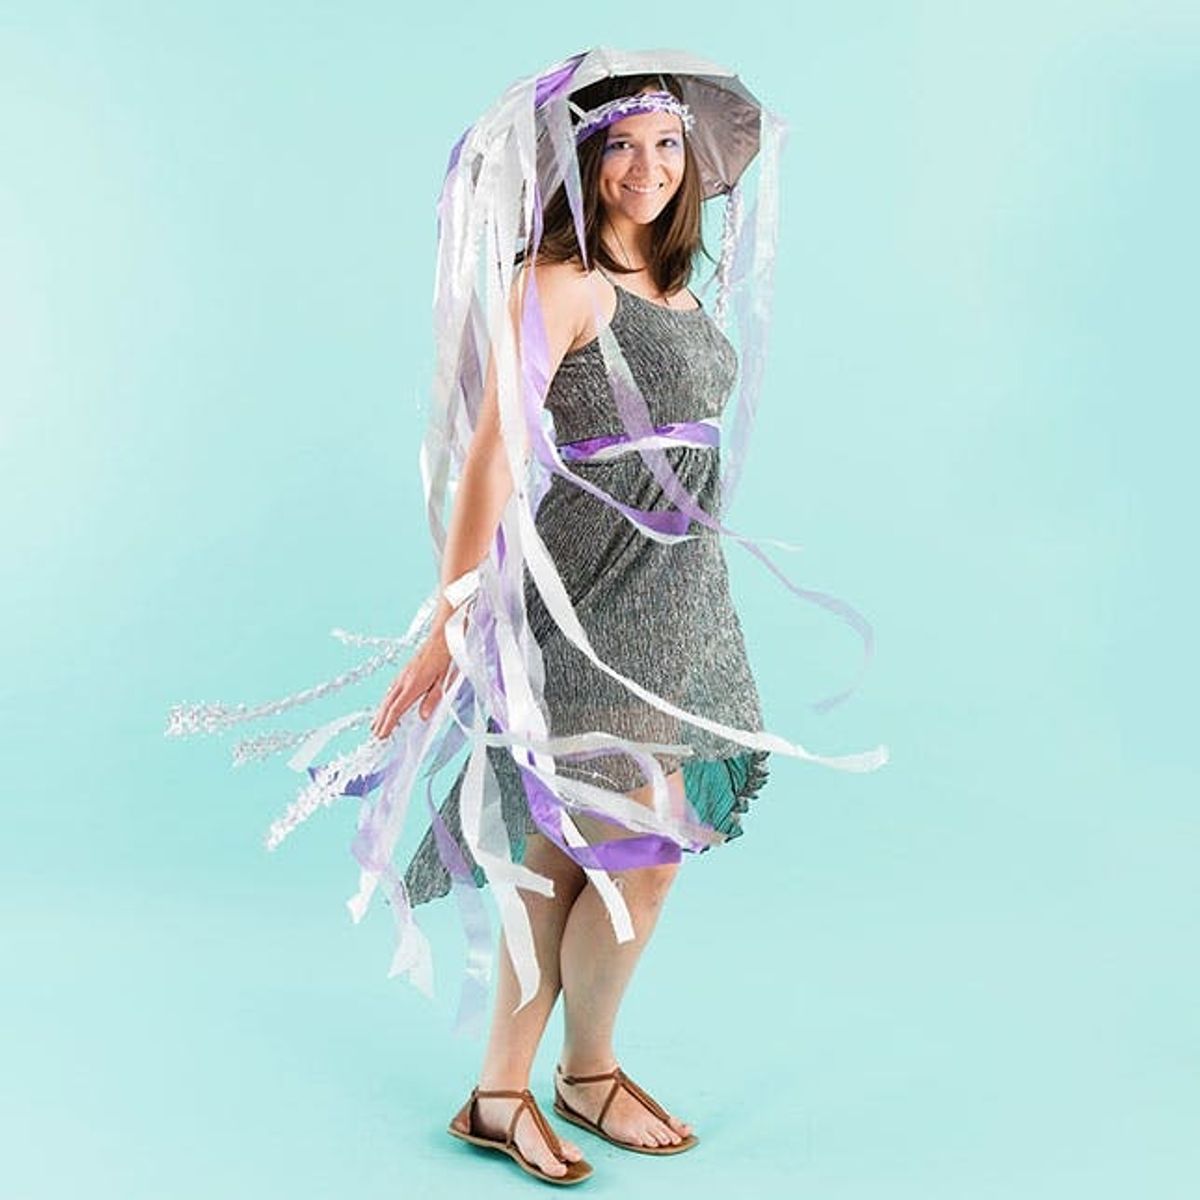 3 Ways to Make a Jellyfish Costume for Halloween